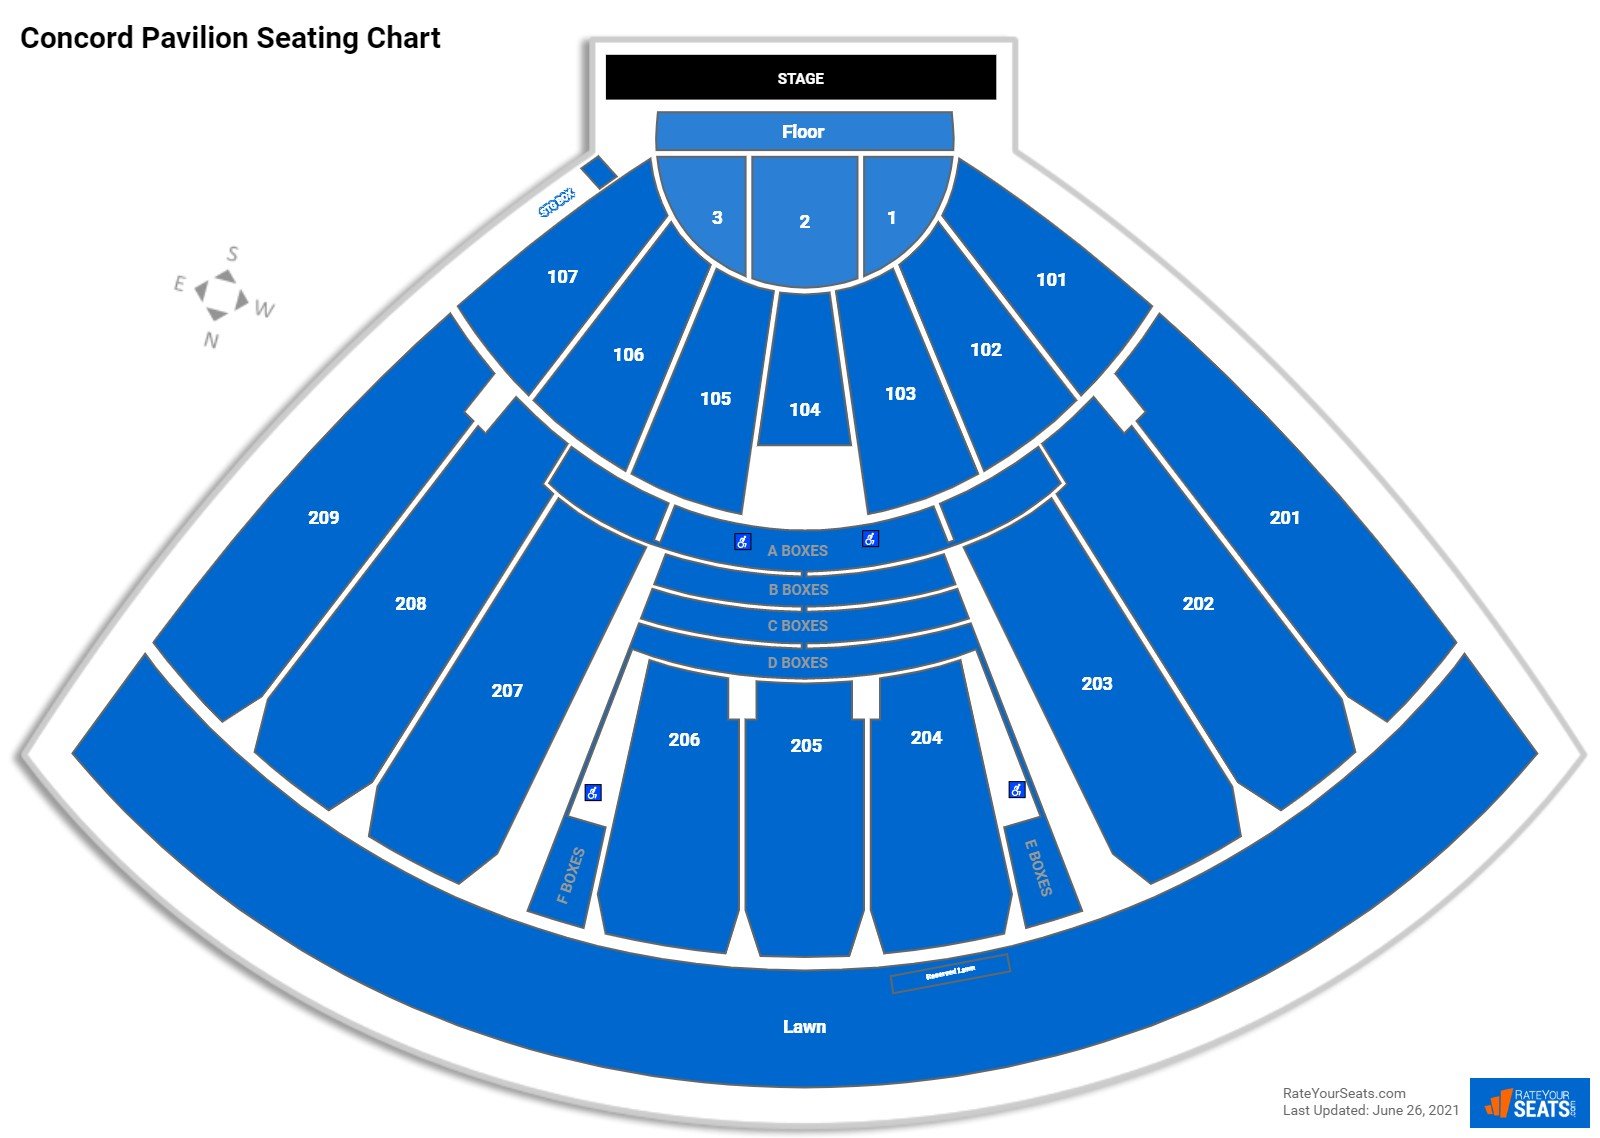 Seat Number Concord Pavilion Seating Chart